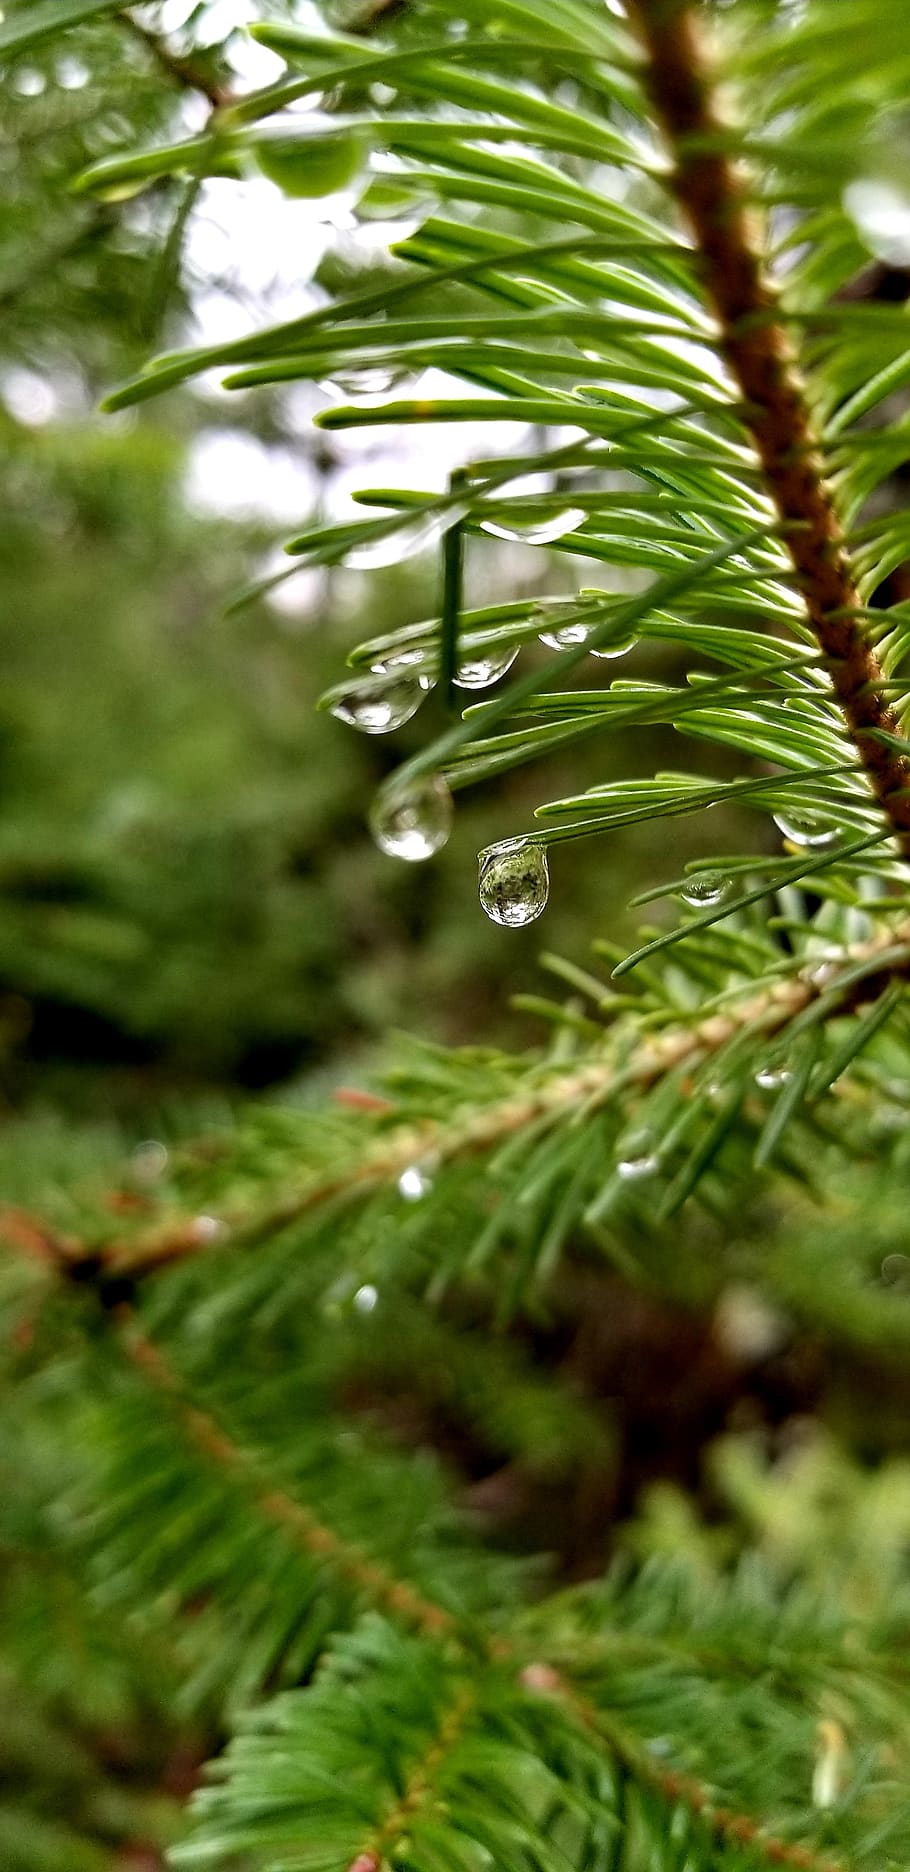 pine tree, needles, close up, water drop, forest, rain, nature, greenery, woods, reflection